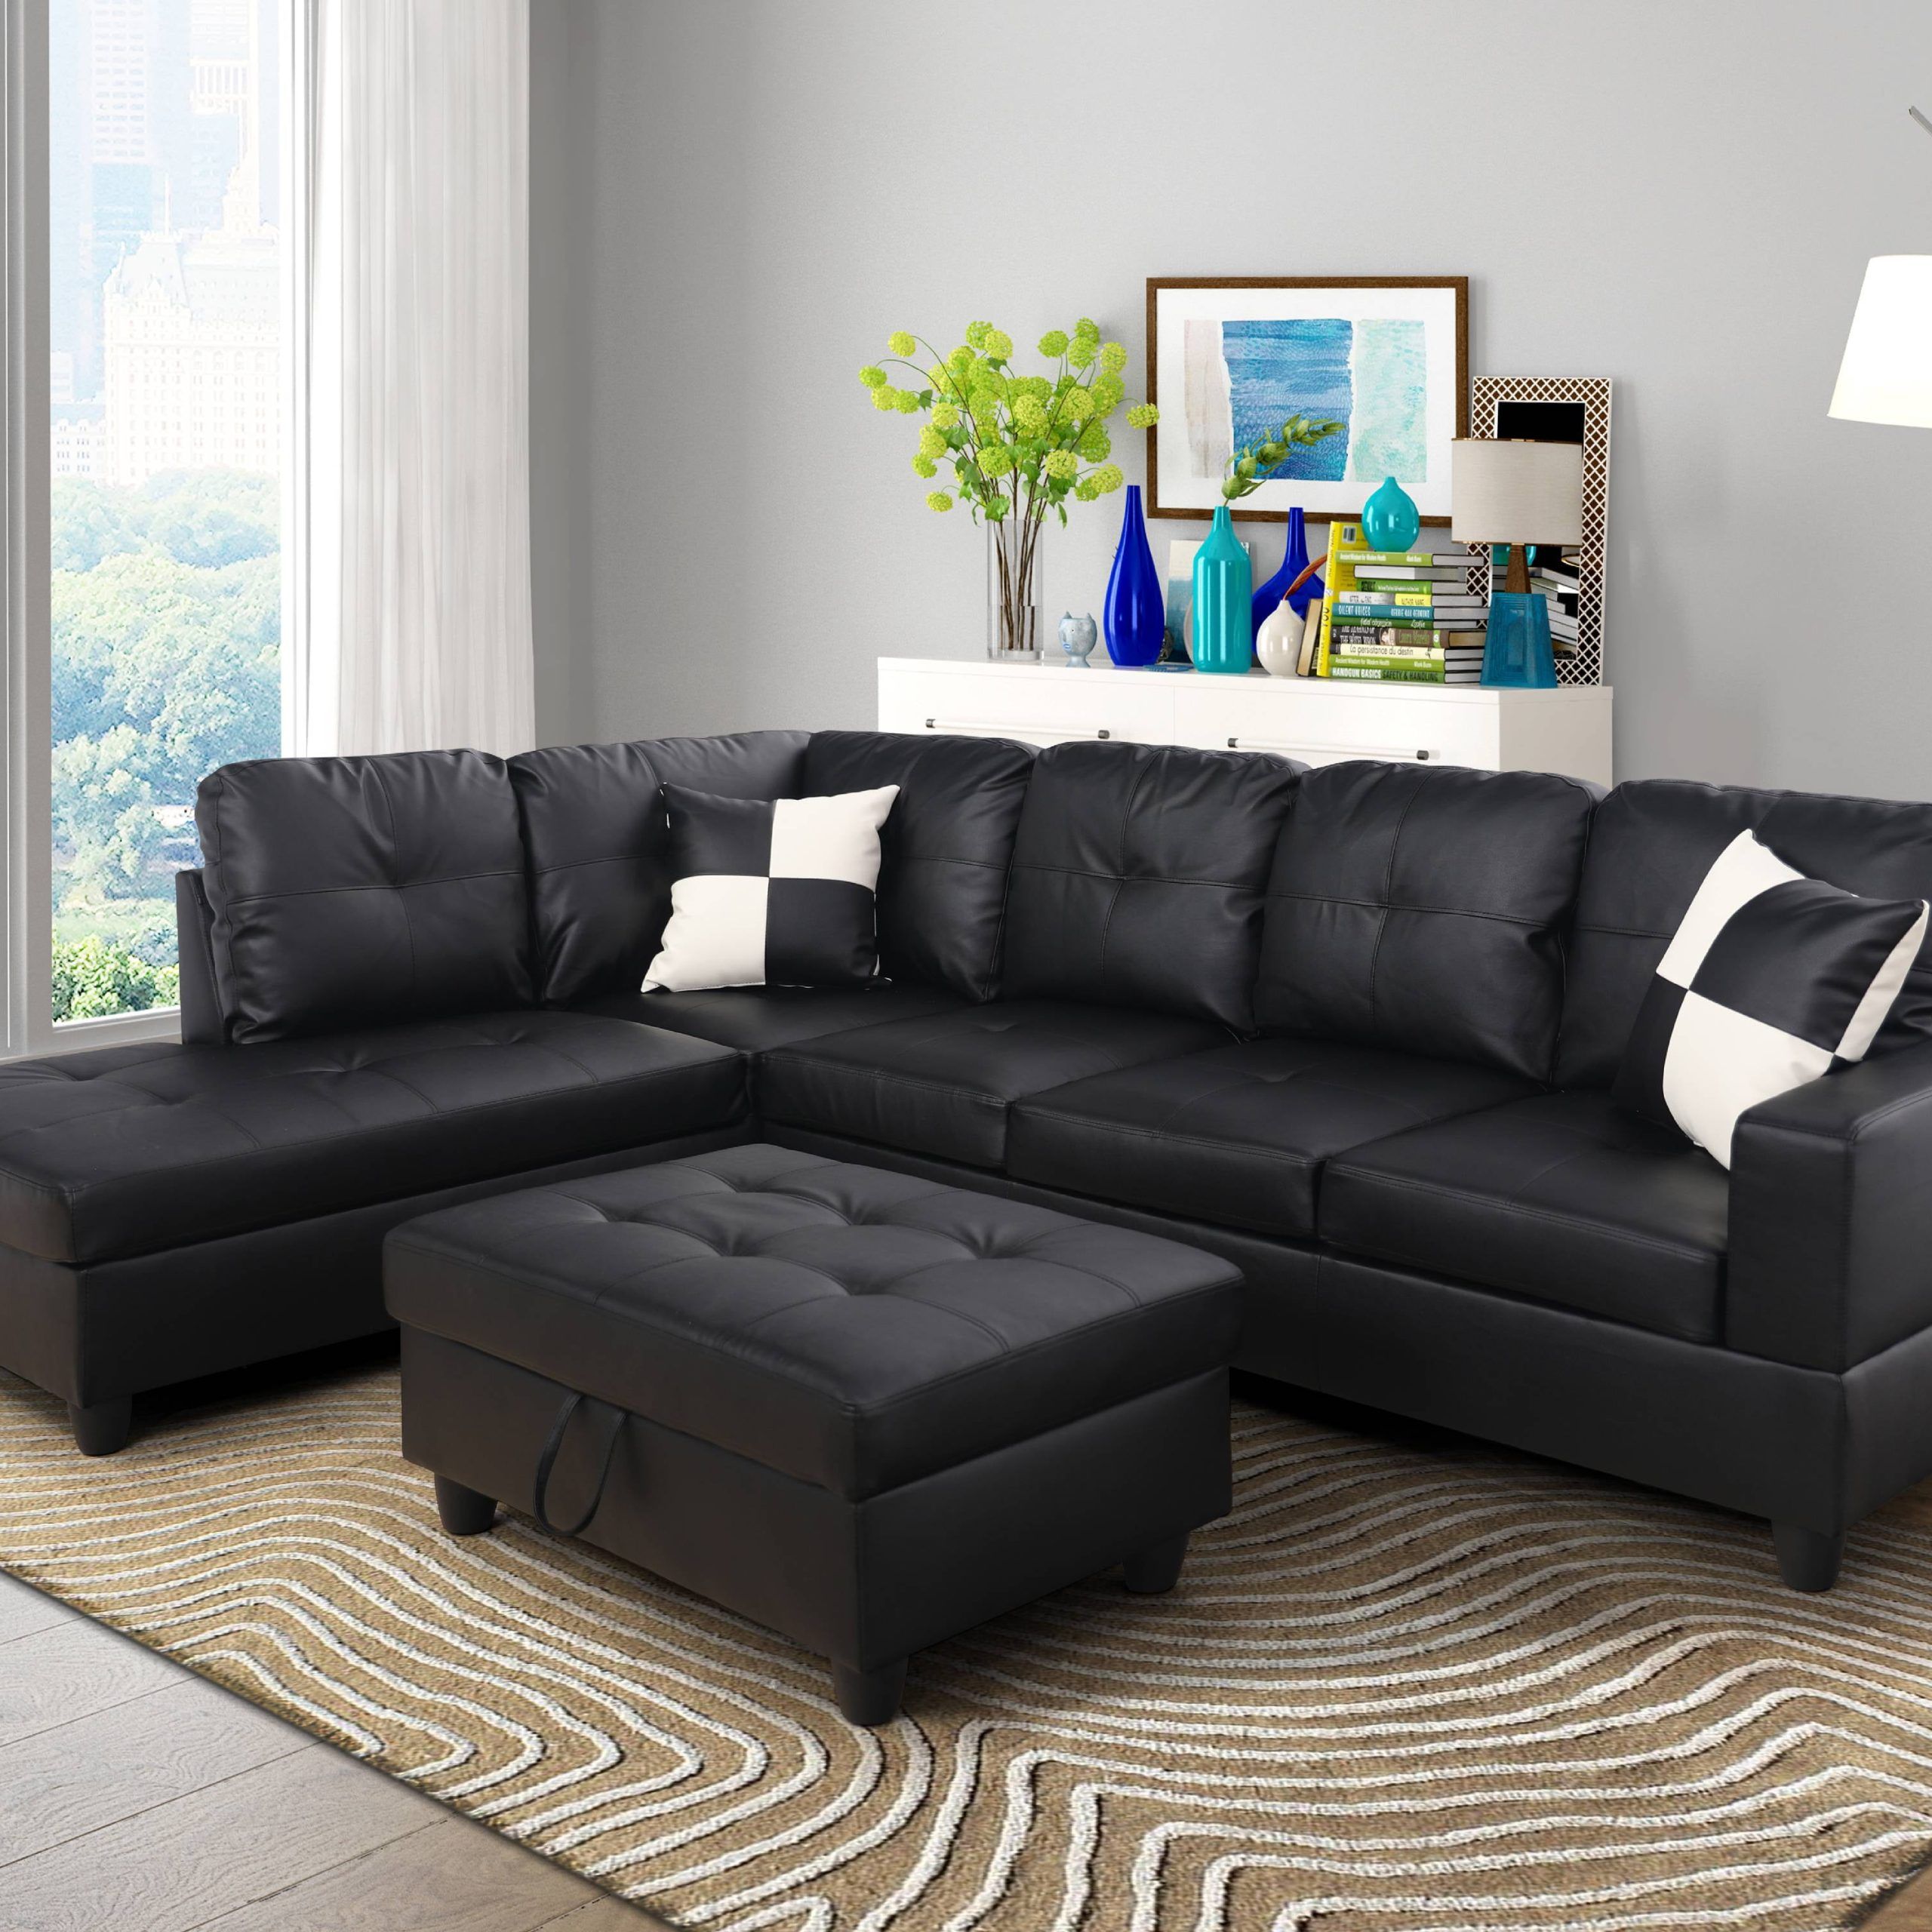 2017 For U Furnishing Classic Black Faux Leather Sectional Sofa, Right With Regard To Faux Leather Sectional Sofa Sets (Photo 1 of 15)